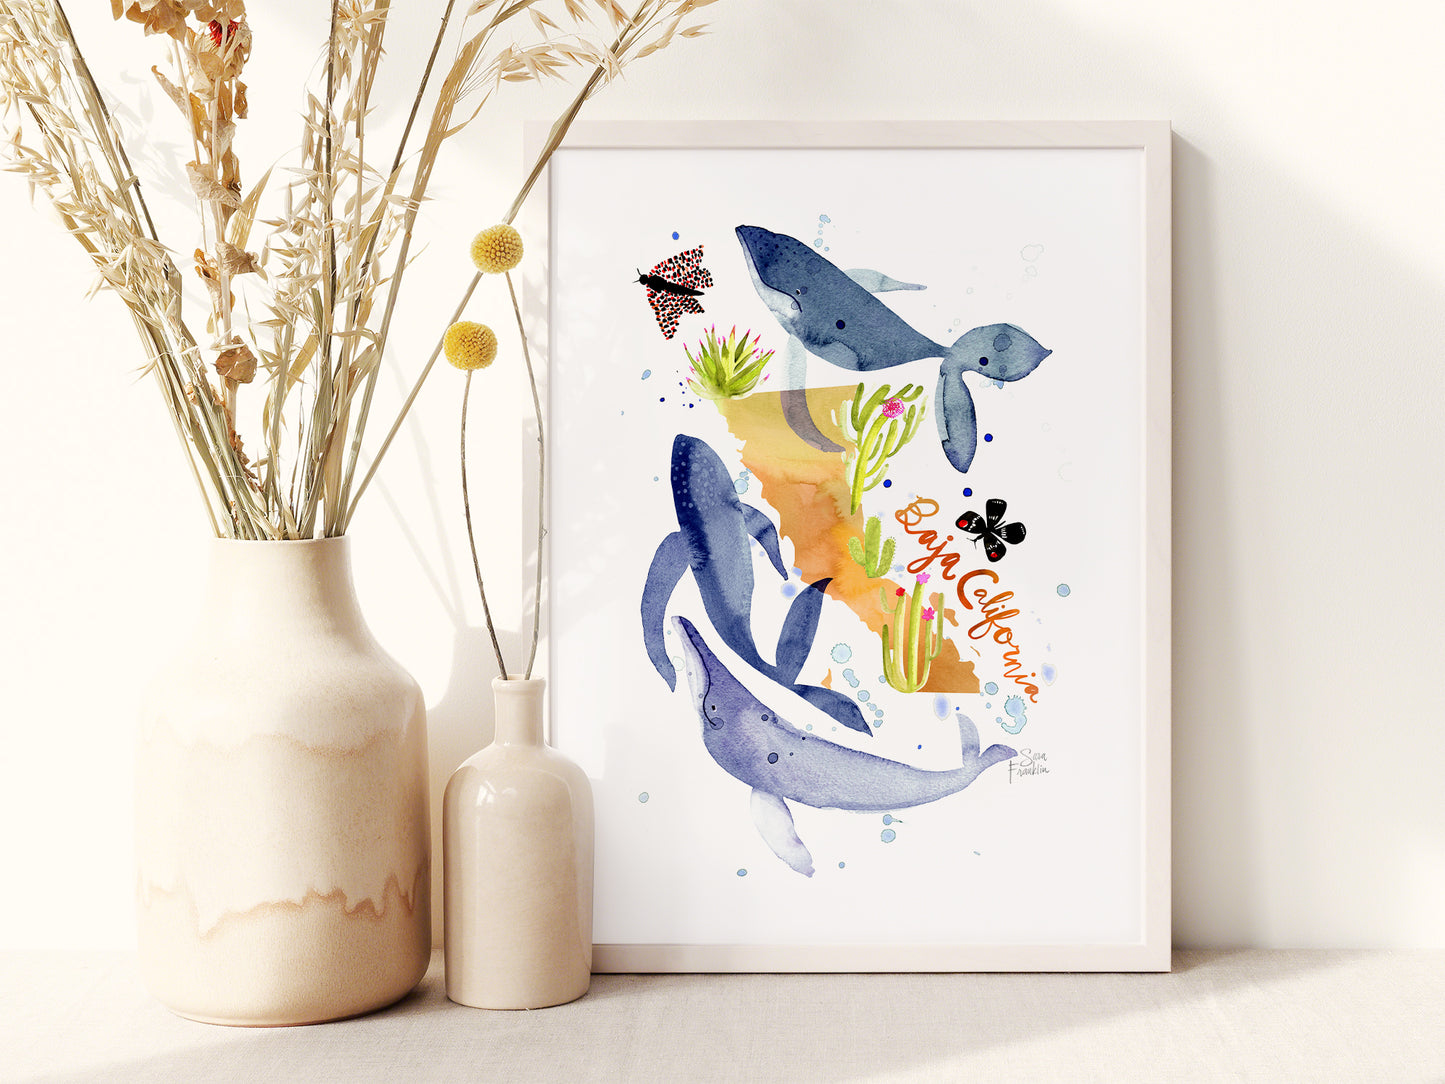 a watercolor painting of a fish and flowers in a vase